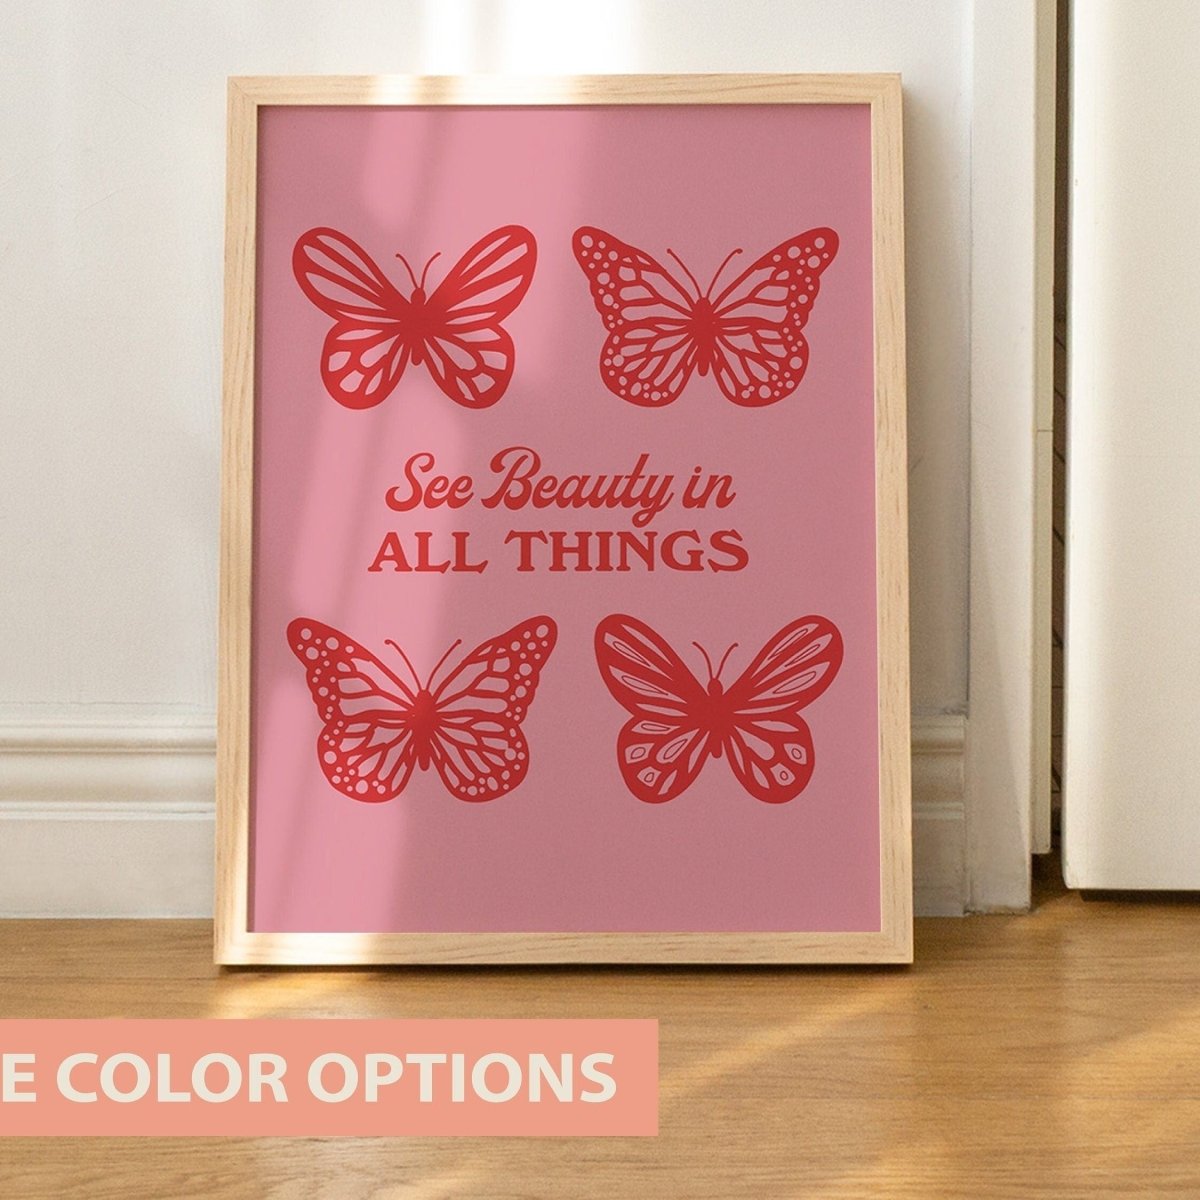 'See Beauty' Retro Butterfly Print - Art Prints - Kinder Planet Company